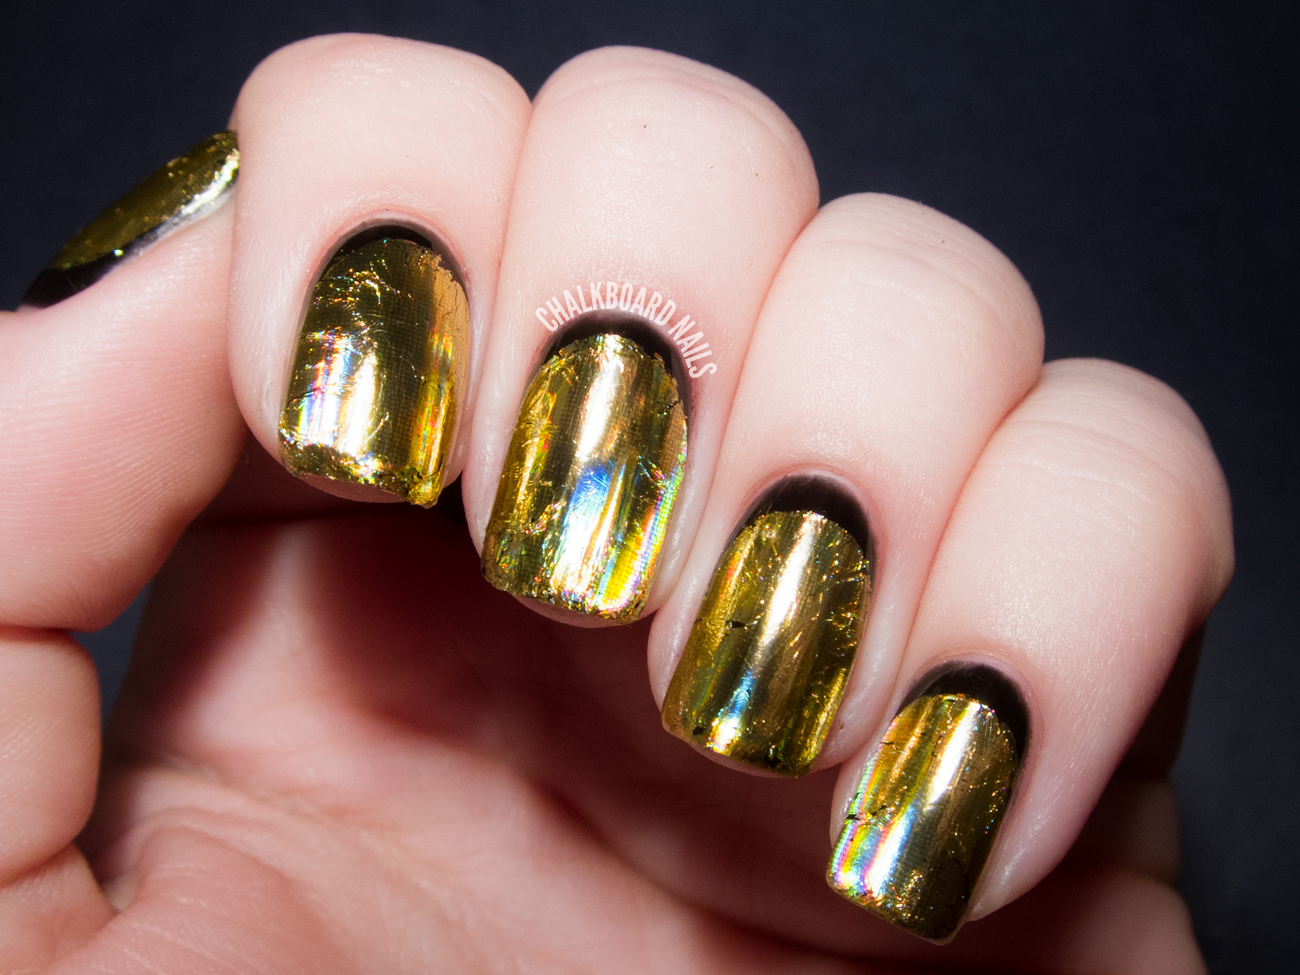 Black and Gold Nail Art Designs - wide 8